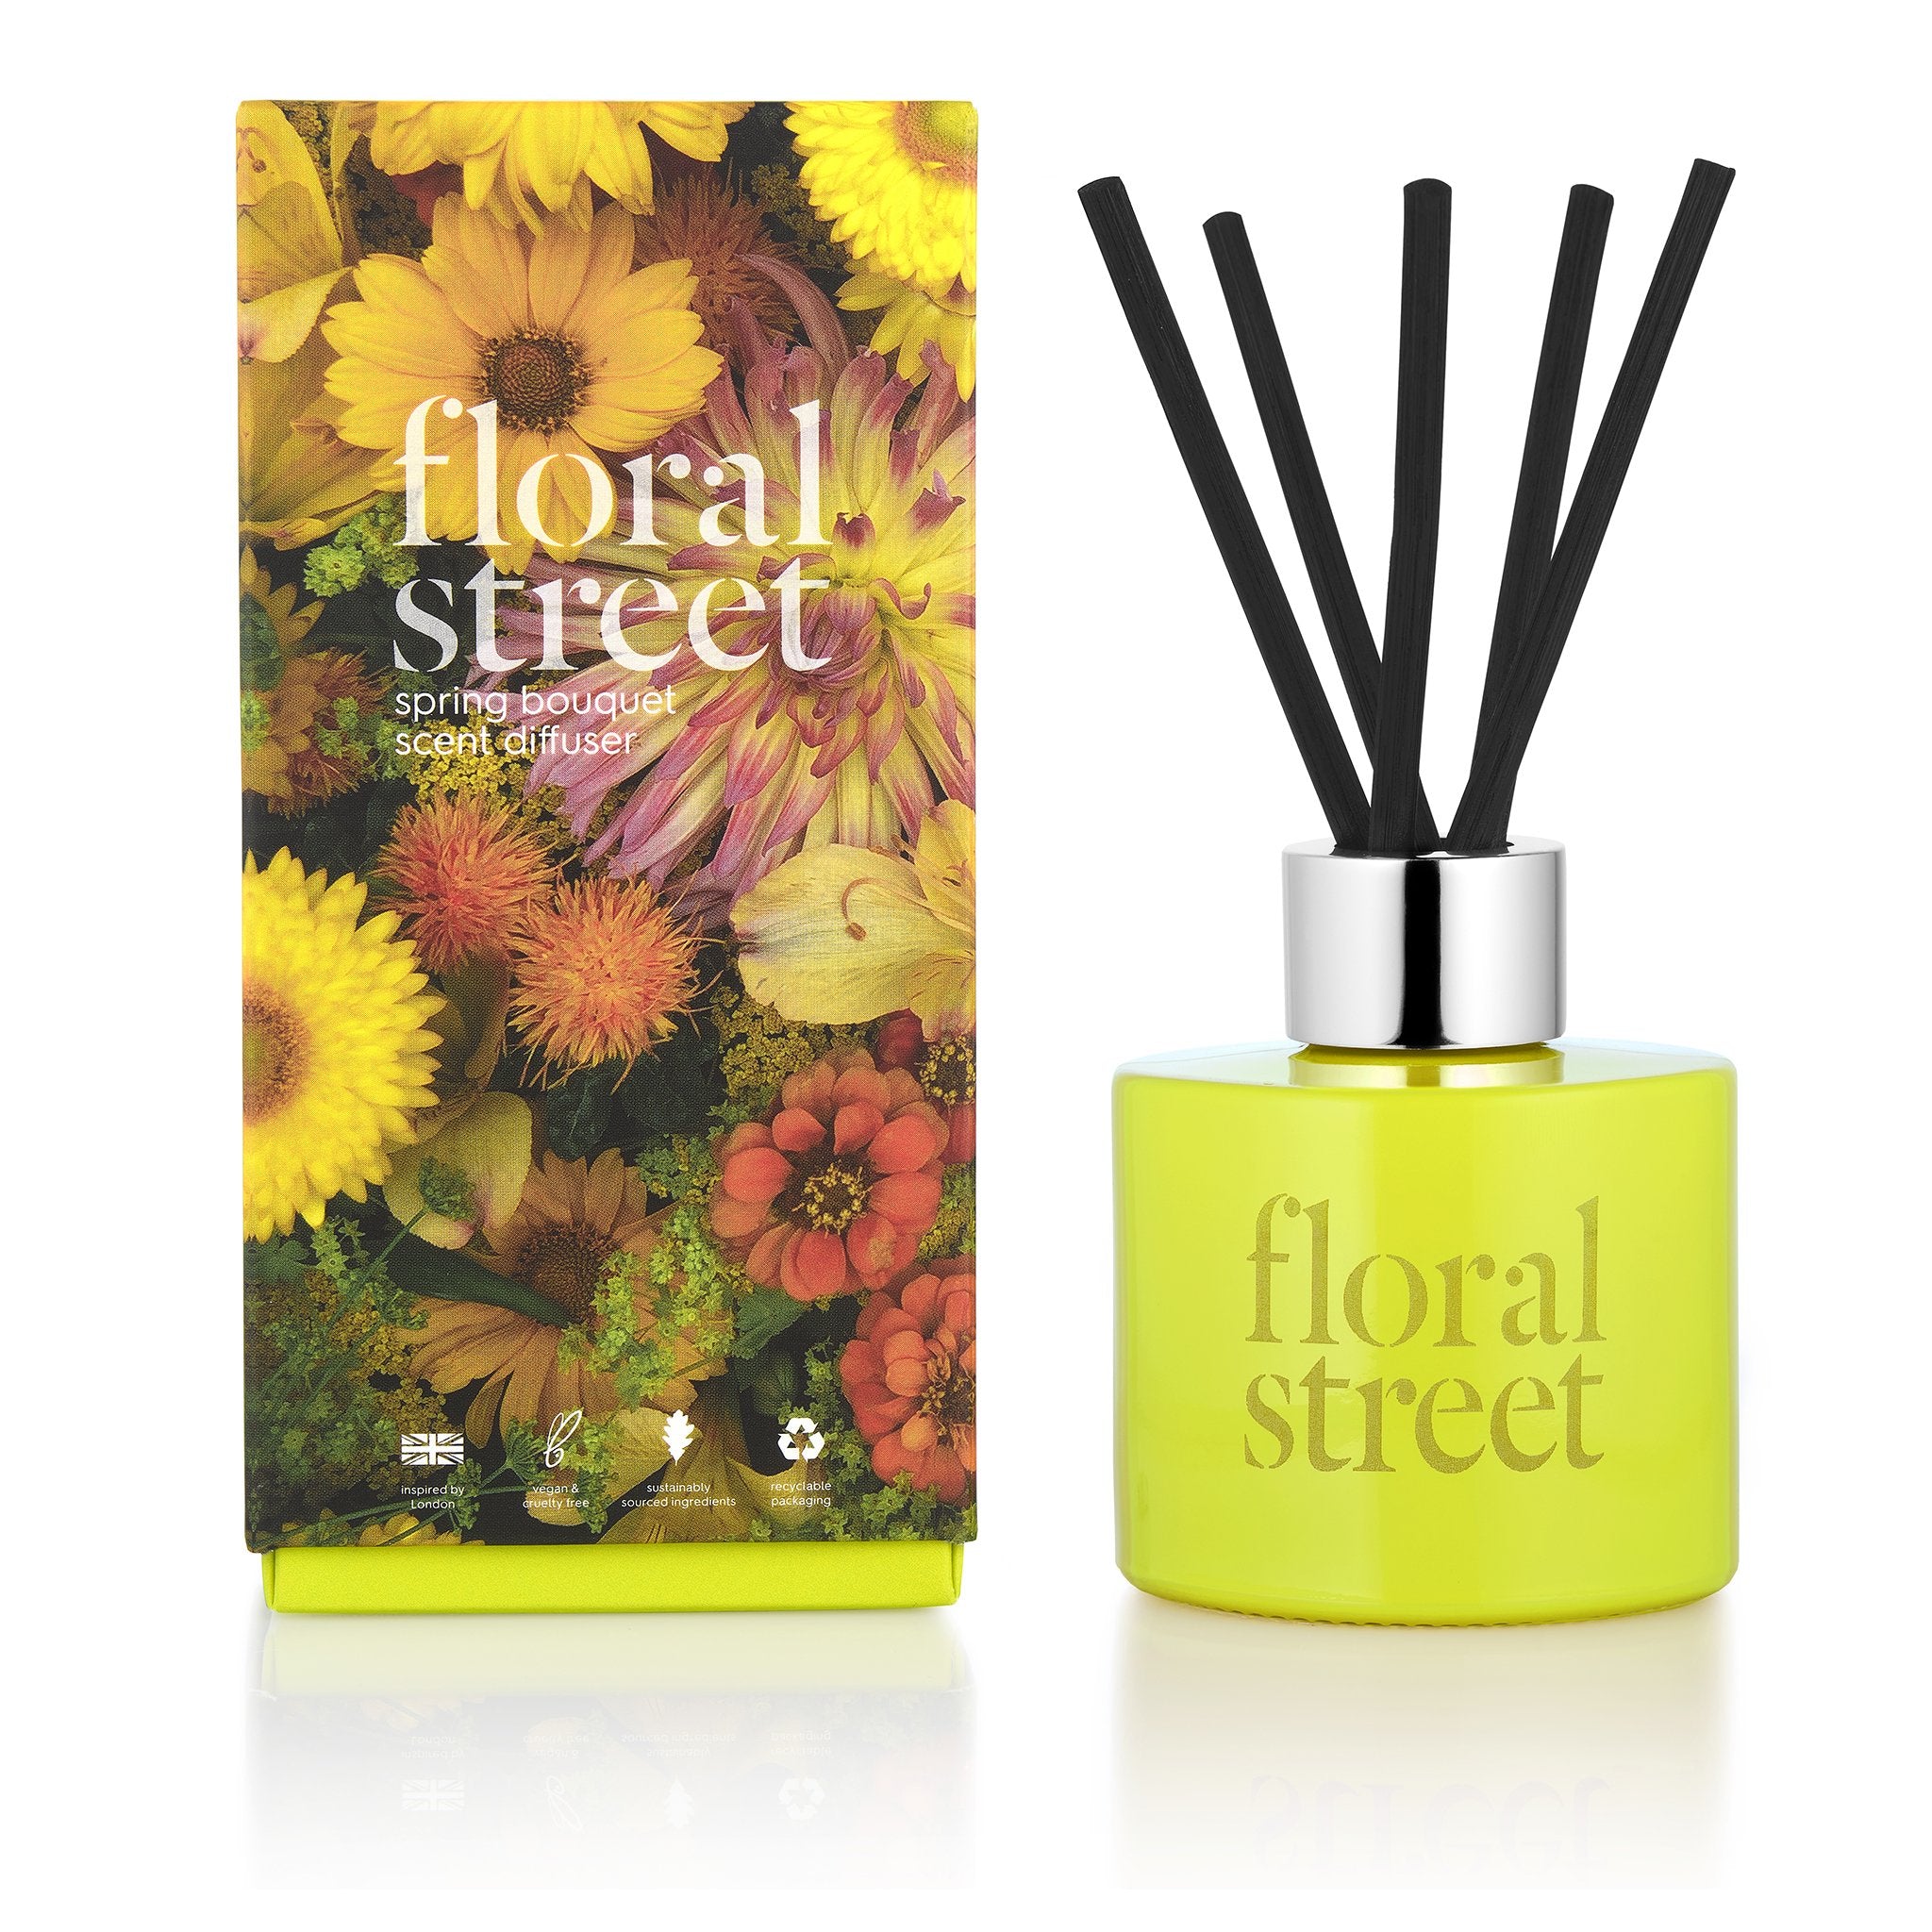 spring bouquet diffuser